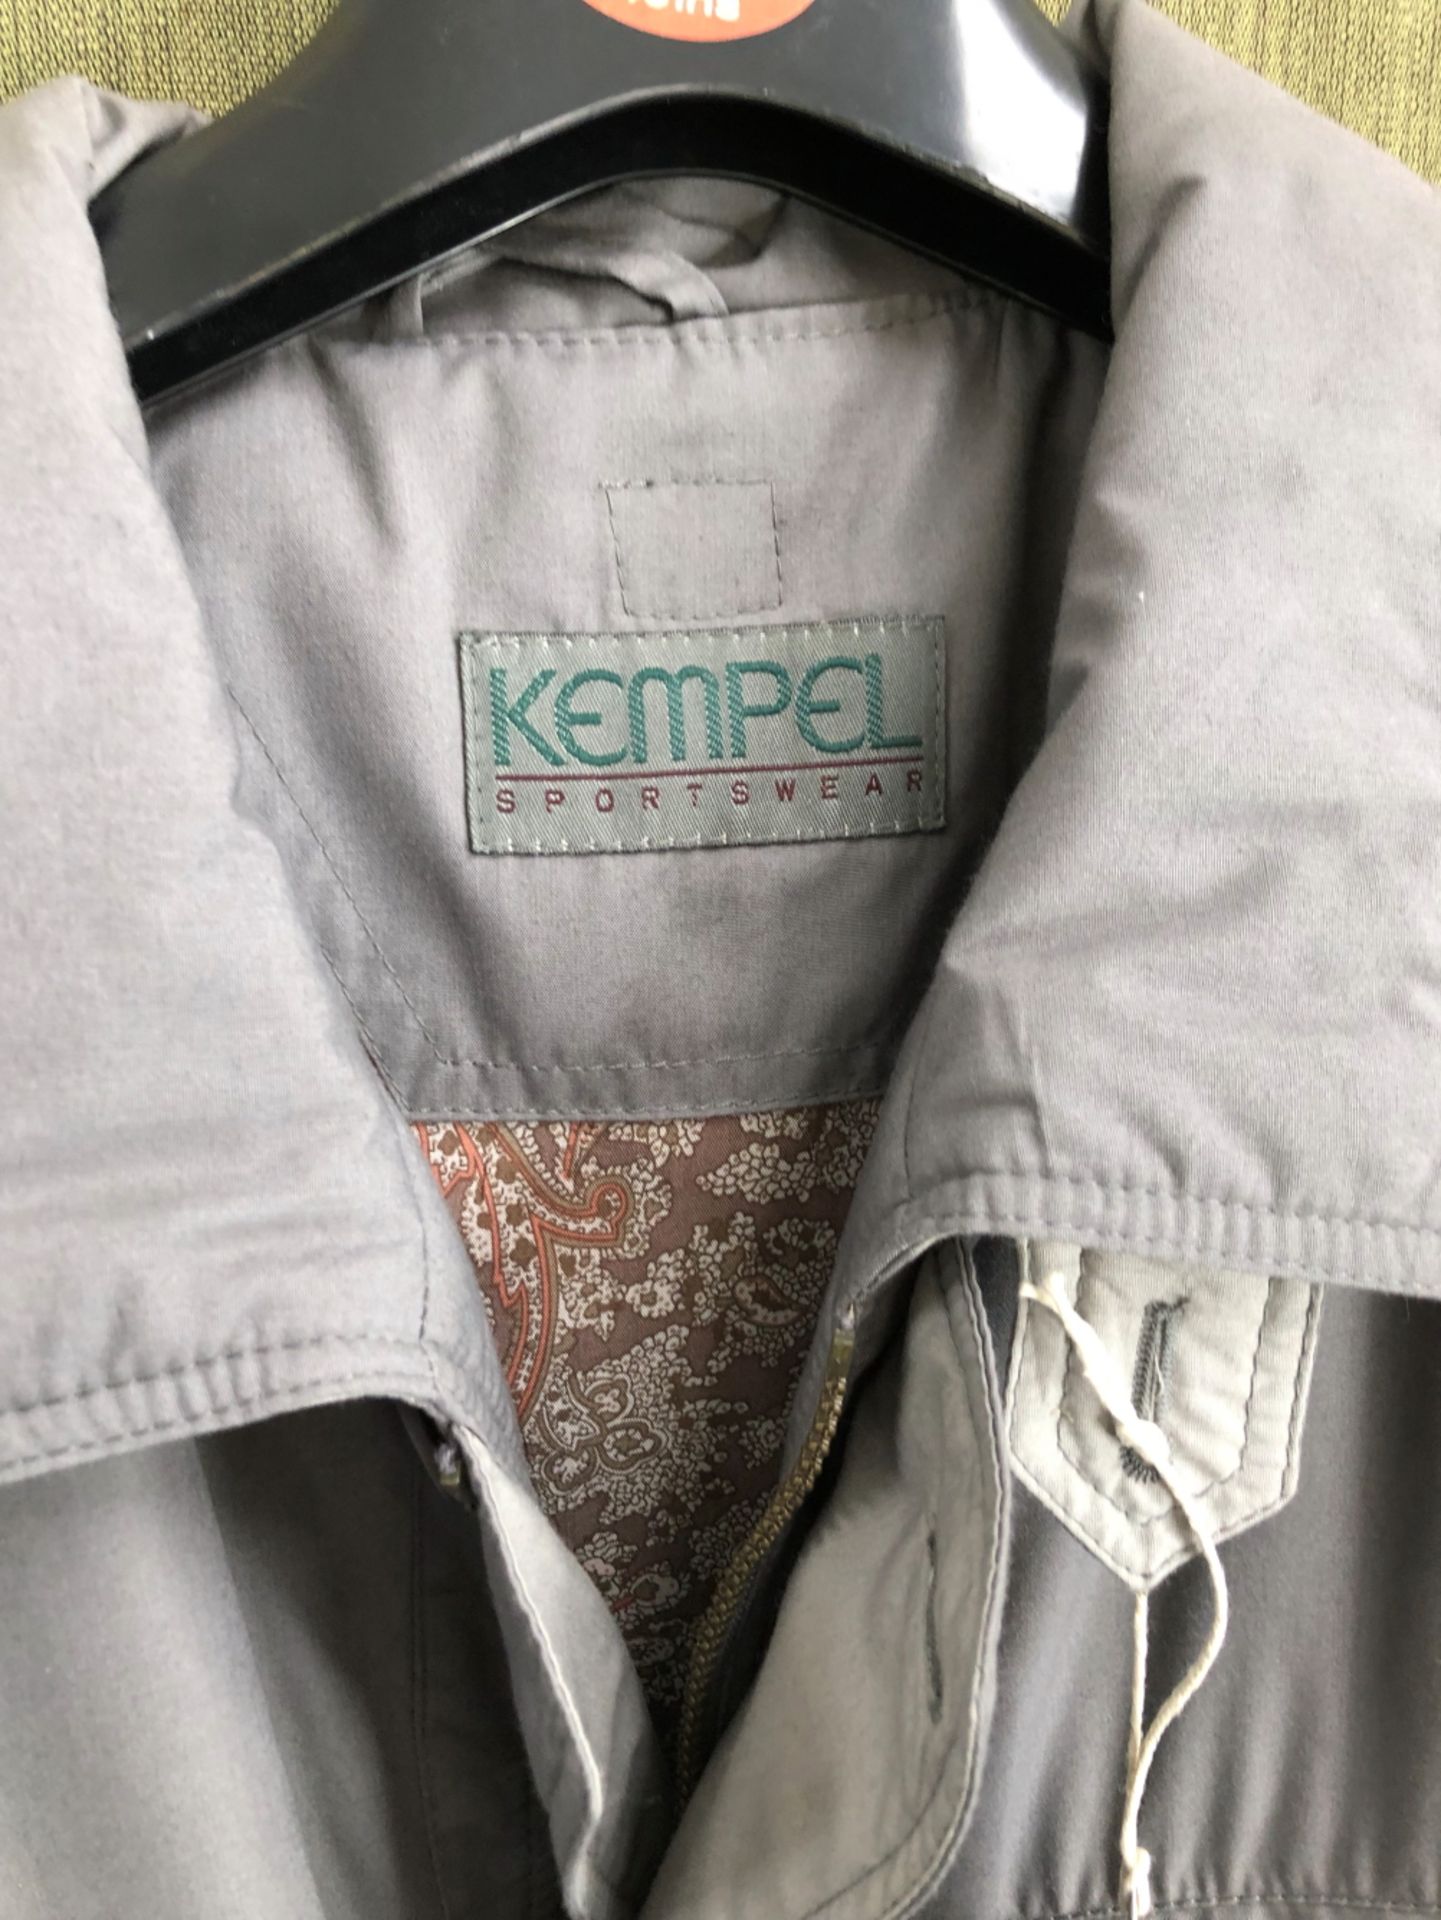 JACKET: KEMPEL SPORTSWEAR, GREY QUILTED, SIZE 44 TOGETHER WITH JACKET: FARFIELD MICRO ROYALE, CREAM, - Image 8 of 9